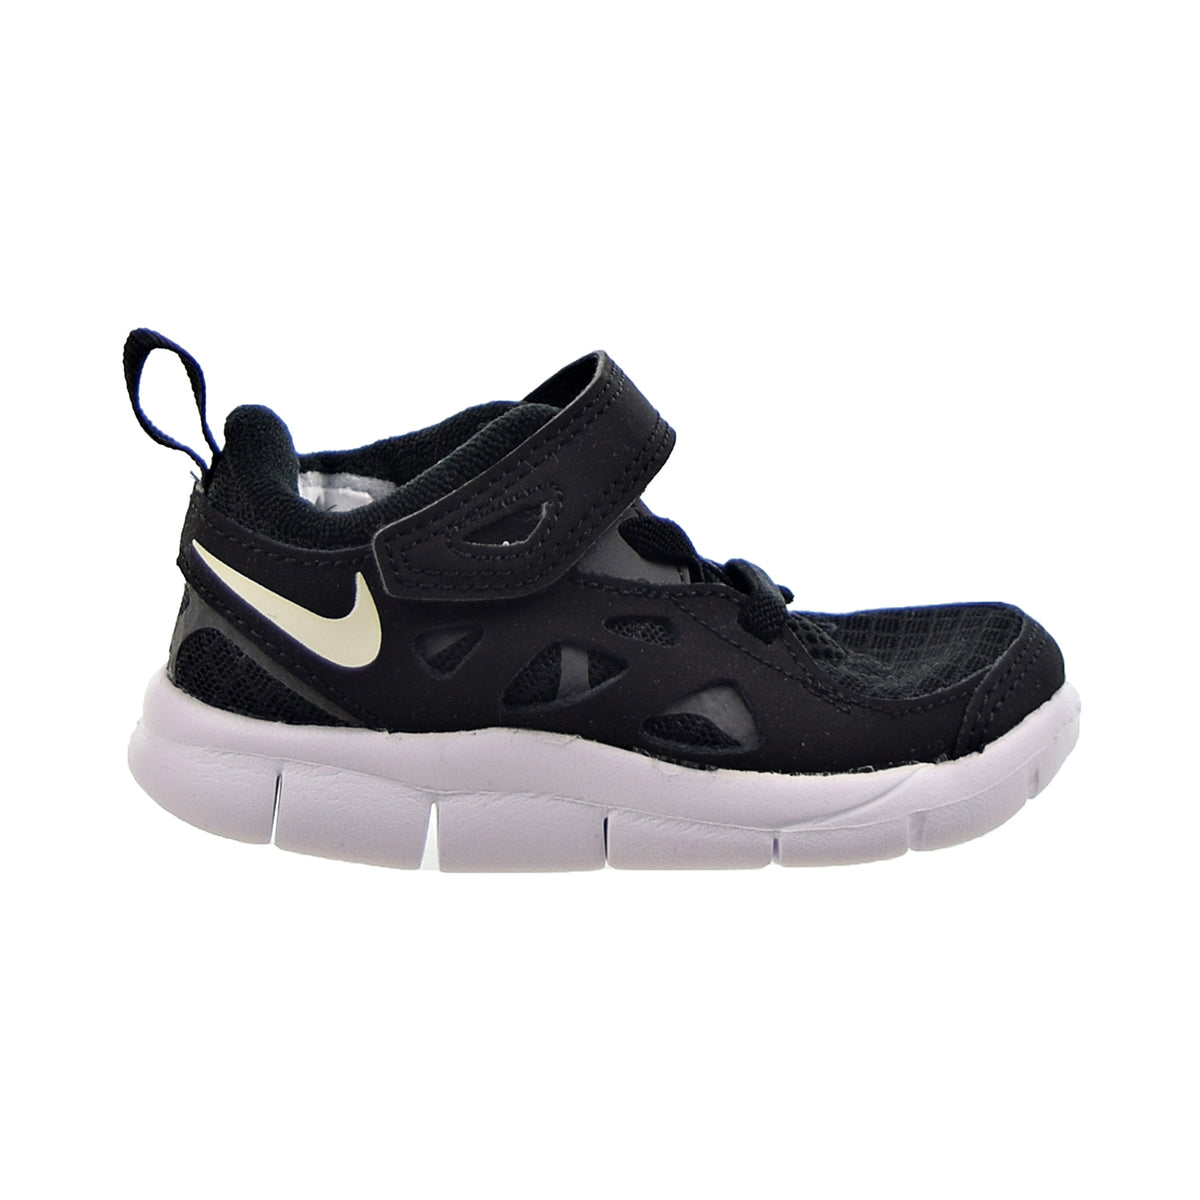 Catastrofaal ondergronds tyfoon Nike Free Run 2 (TD) Baby/Toddler's Shoes Black-White